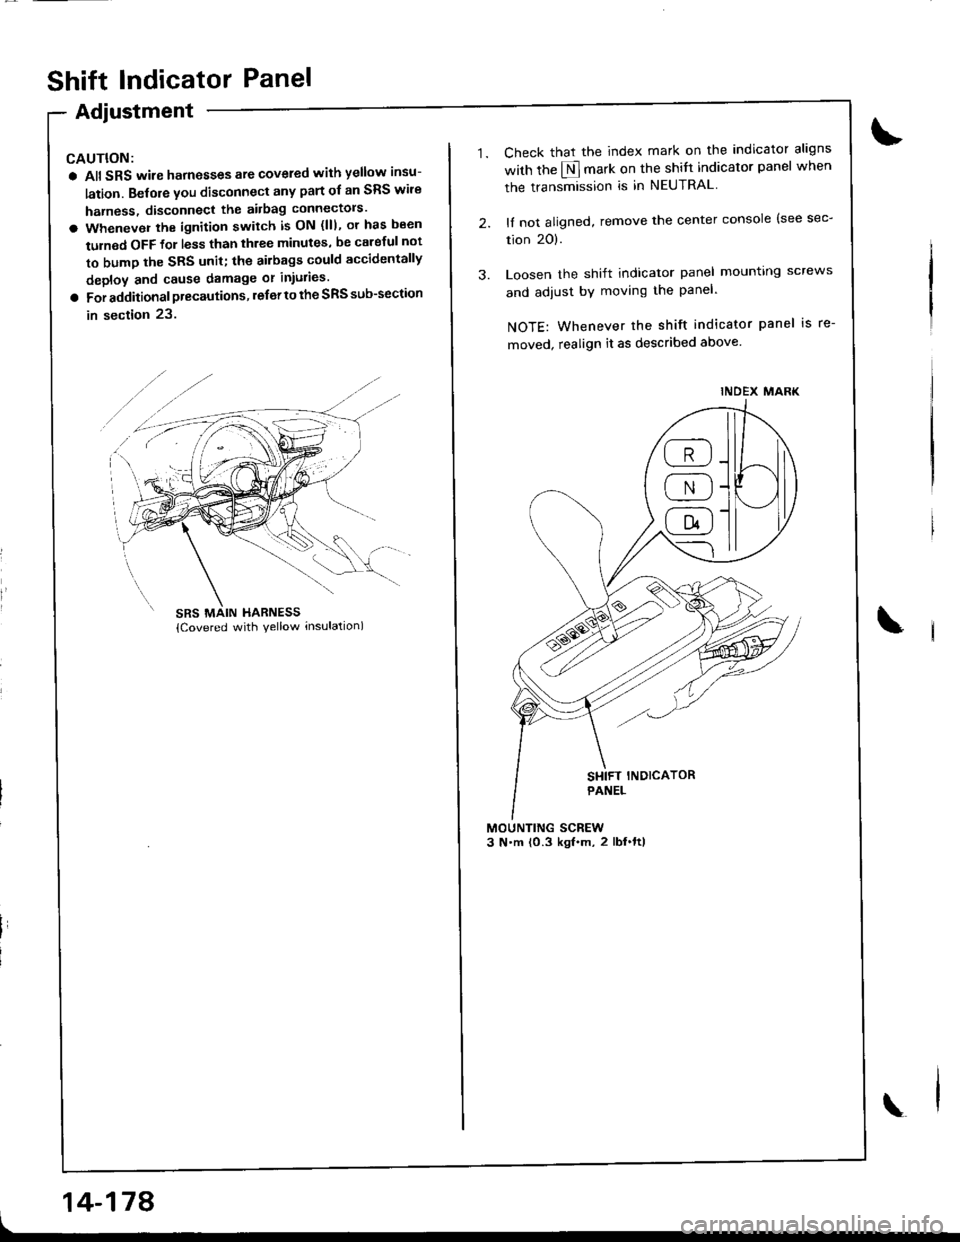 HONDA INTEGRA 1998 4.G Workshop Manual I
Shift lndicator Panel
Adjustment
CAUTION:
a All SRS wire harnesses ate covered with yellow insu-
lation. Belore you disconnect any part ol an SRS wire
harness, disconnect the airbag connectols
a Wh